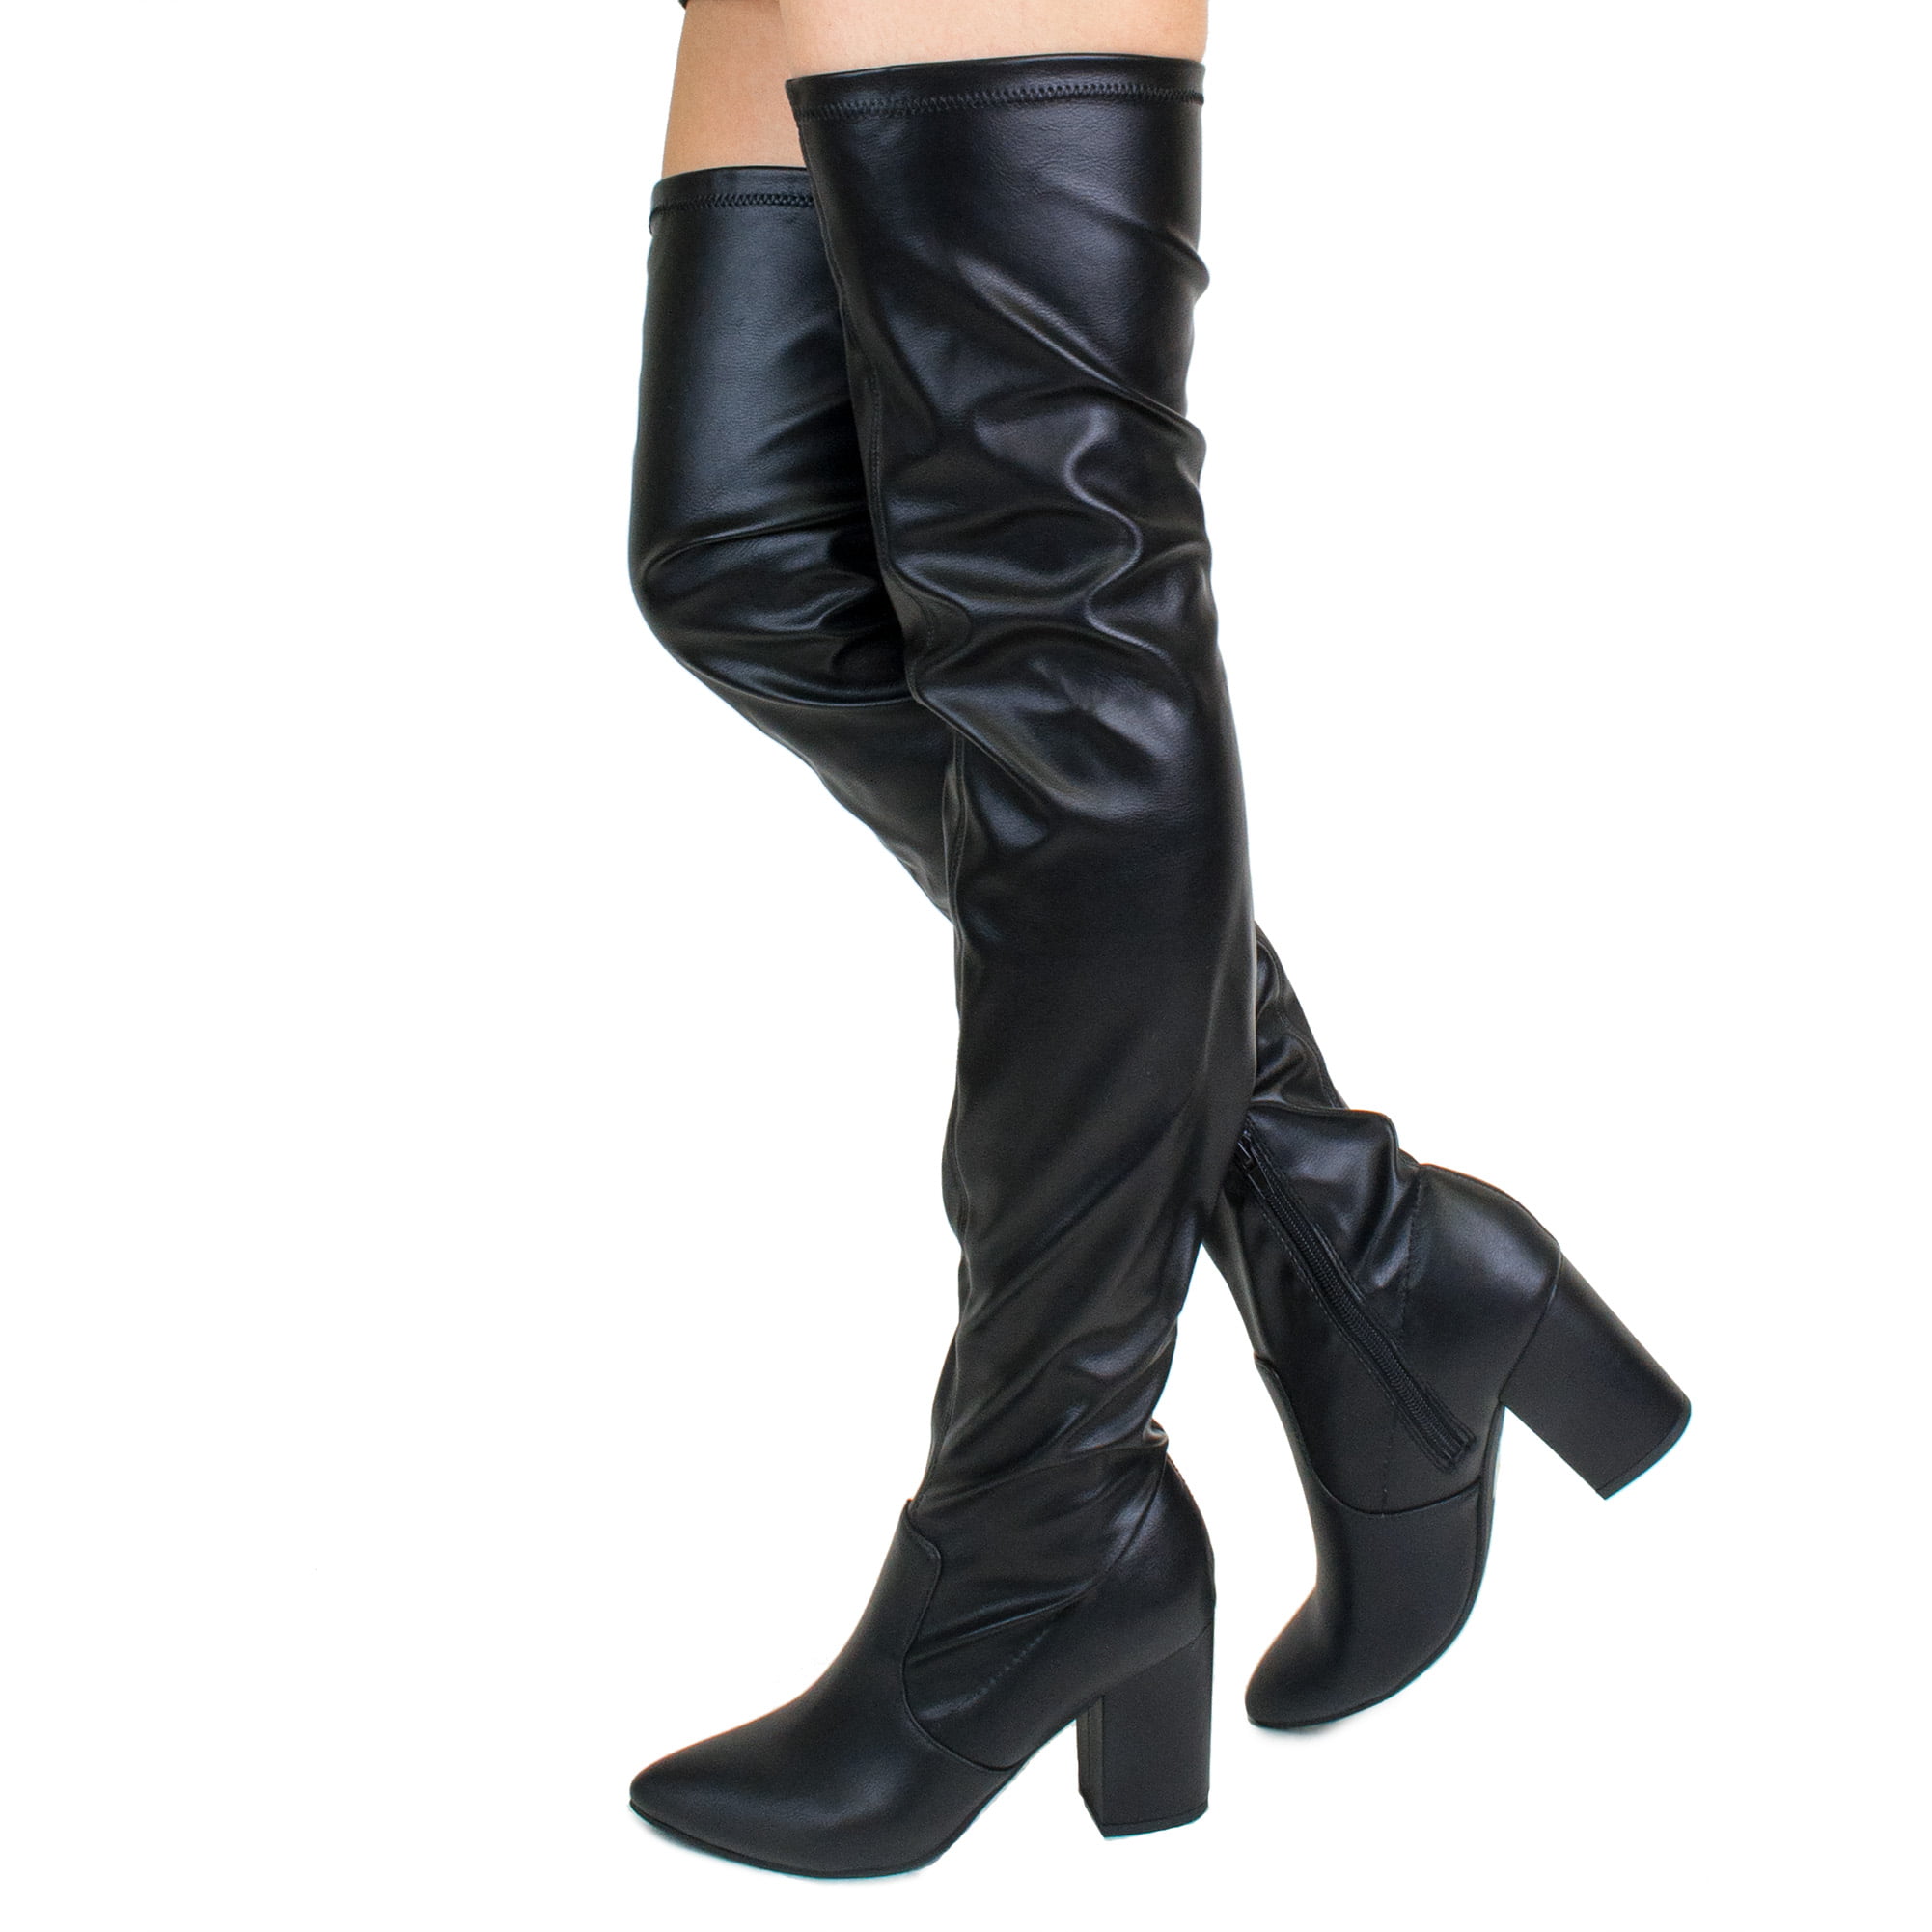 WOMENS LADIES THIGH HIGH BOOTS OVER THE KNEE PARTY STRETCH BLOCK MID HEEL SIZE 